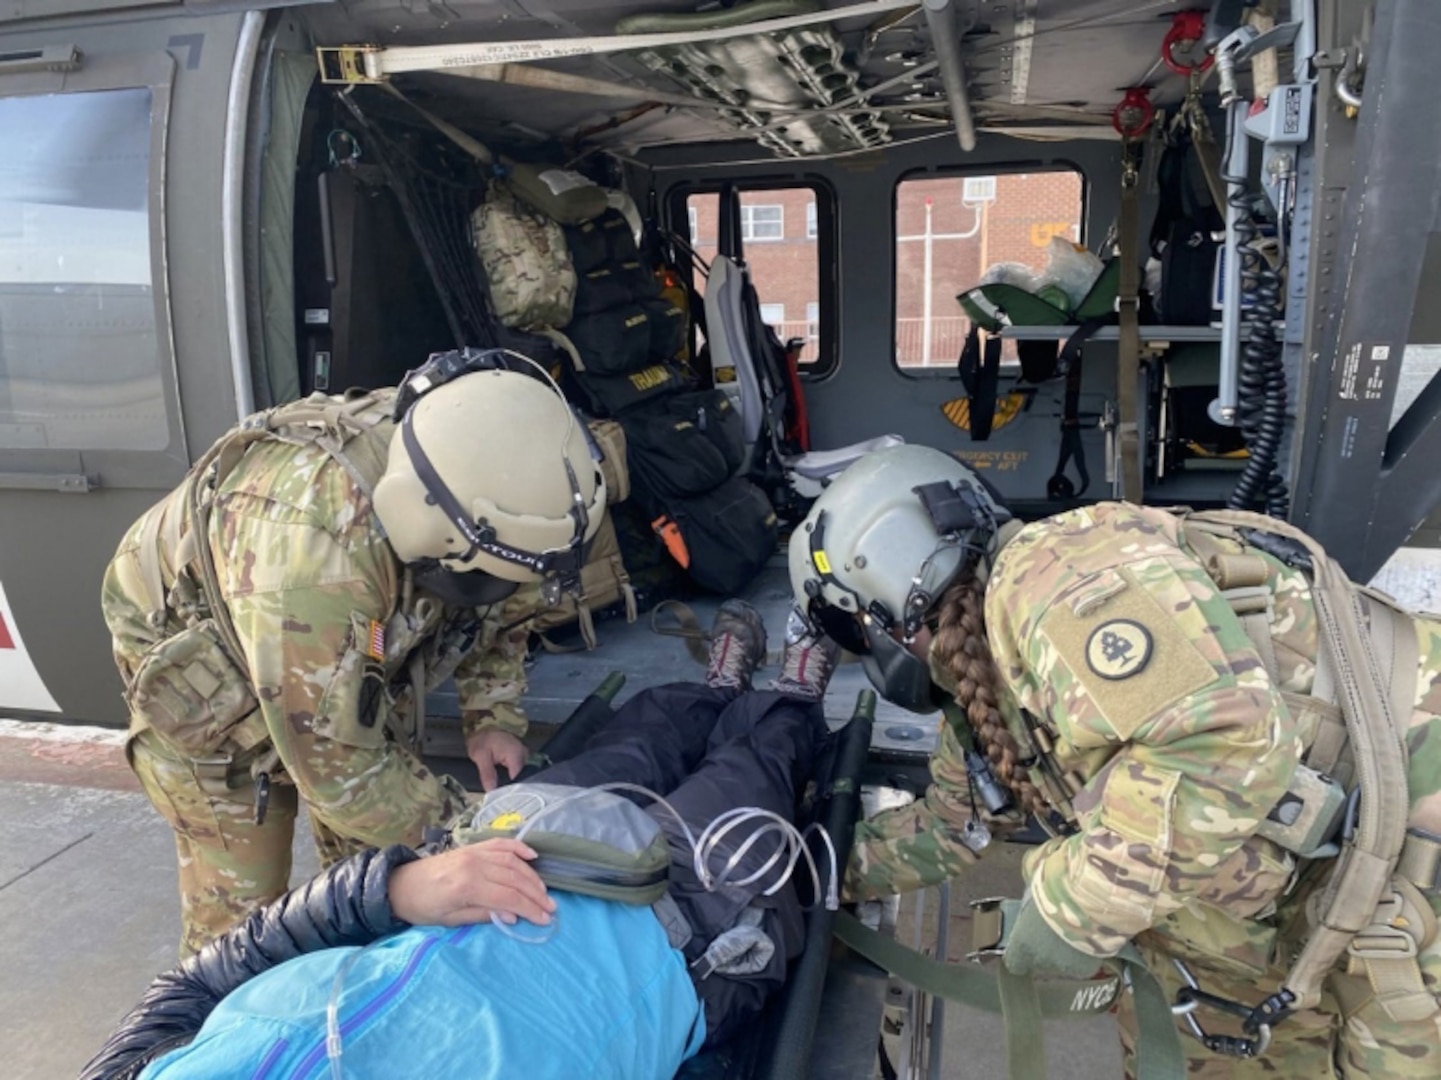 A Tennessee National Guard medical crew arrives at University of Tennessee Medical Center with a hiker who suffered a severe illness on the Appalachian Trail March 15, 2022. The Tennessee National Guard conducted the emergency air evacuation.